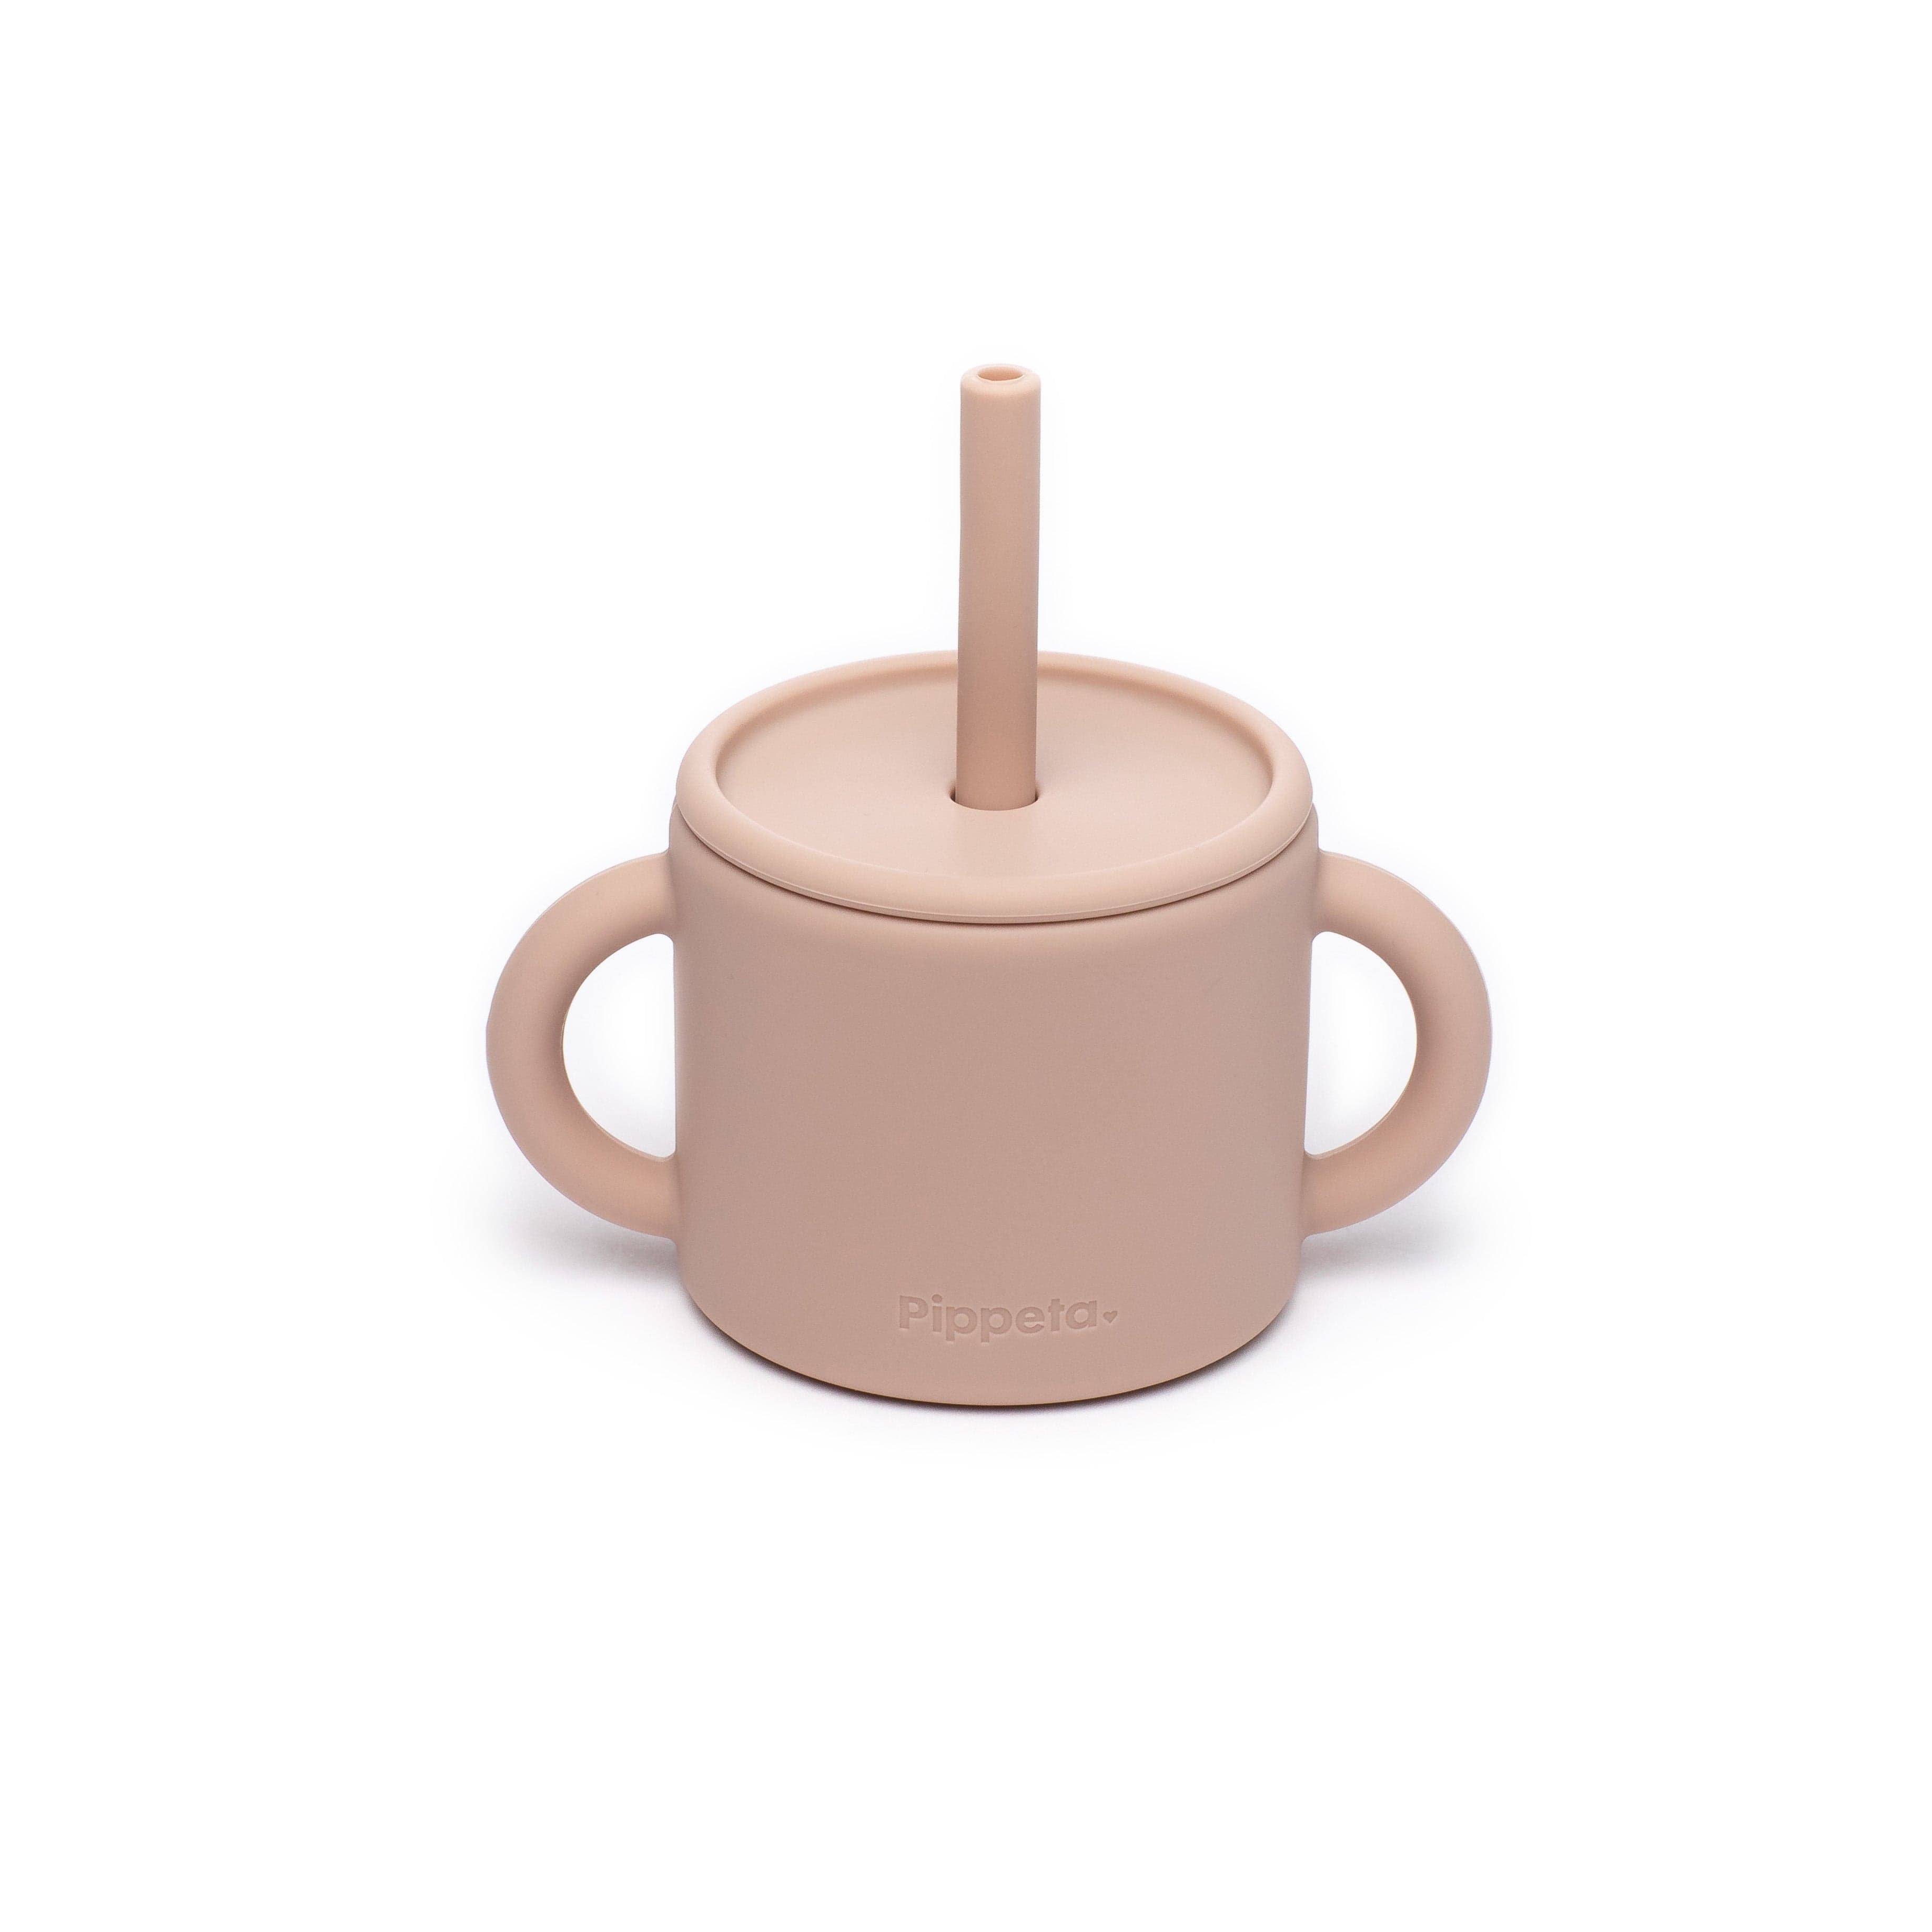 Pippeta Tableware Silicone Cup & Straw (Ash Rose)